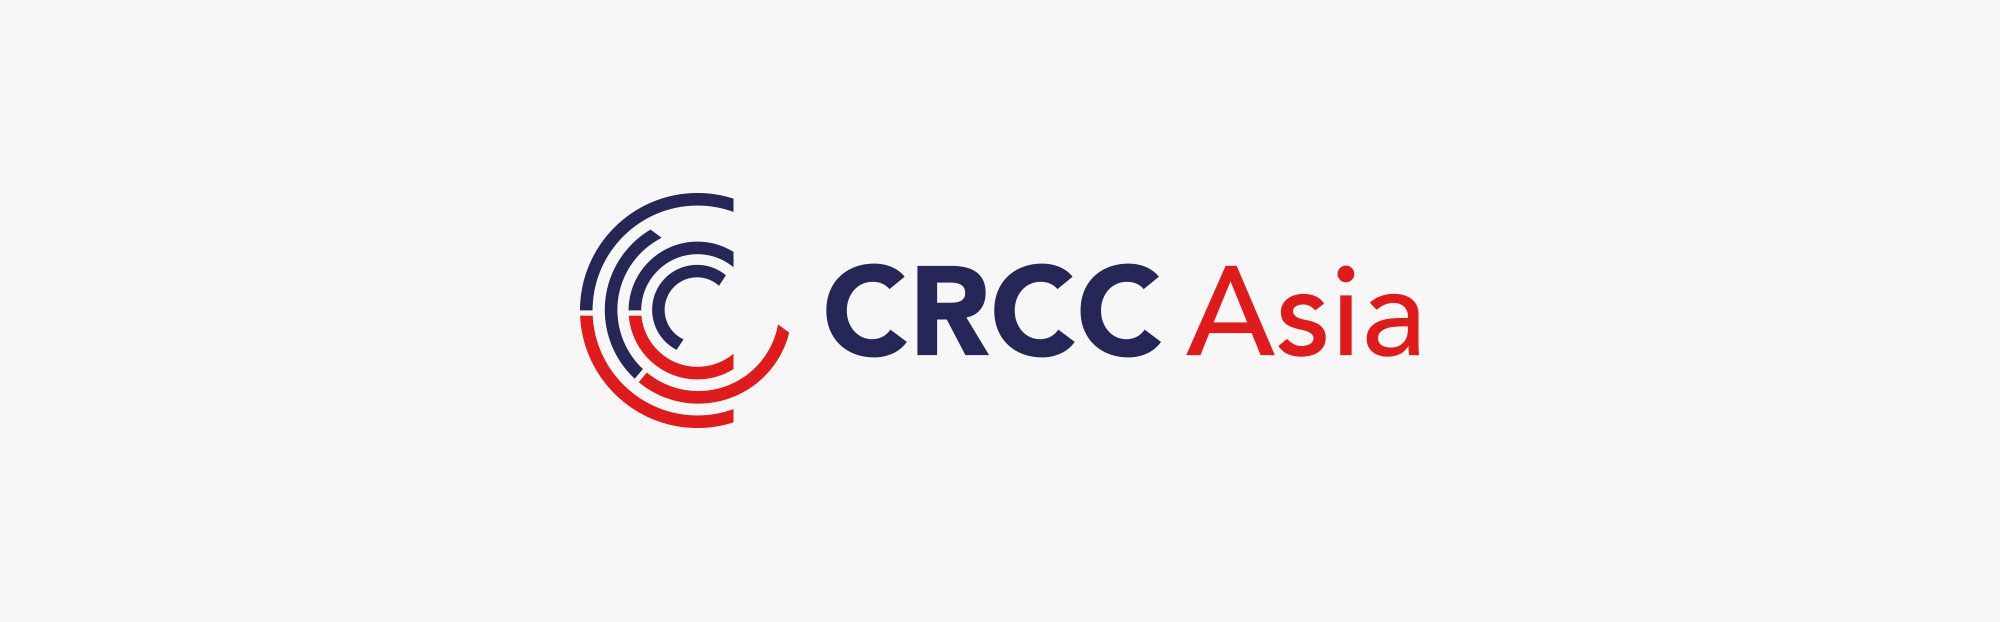 CRCC_Asia-AFTER